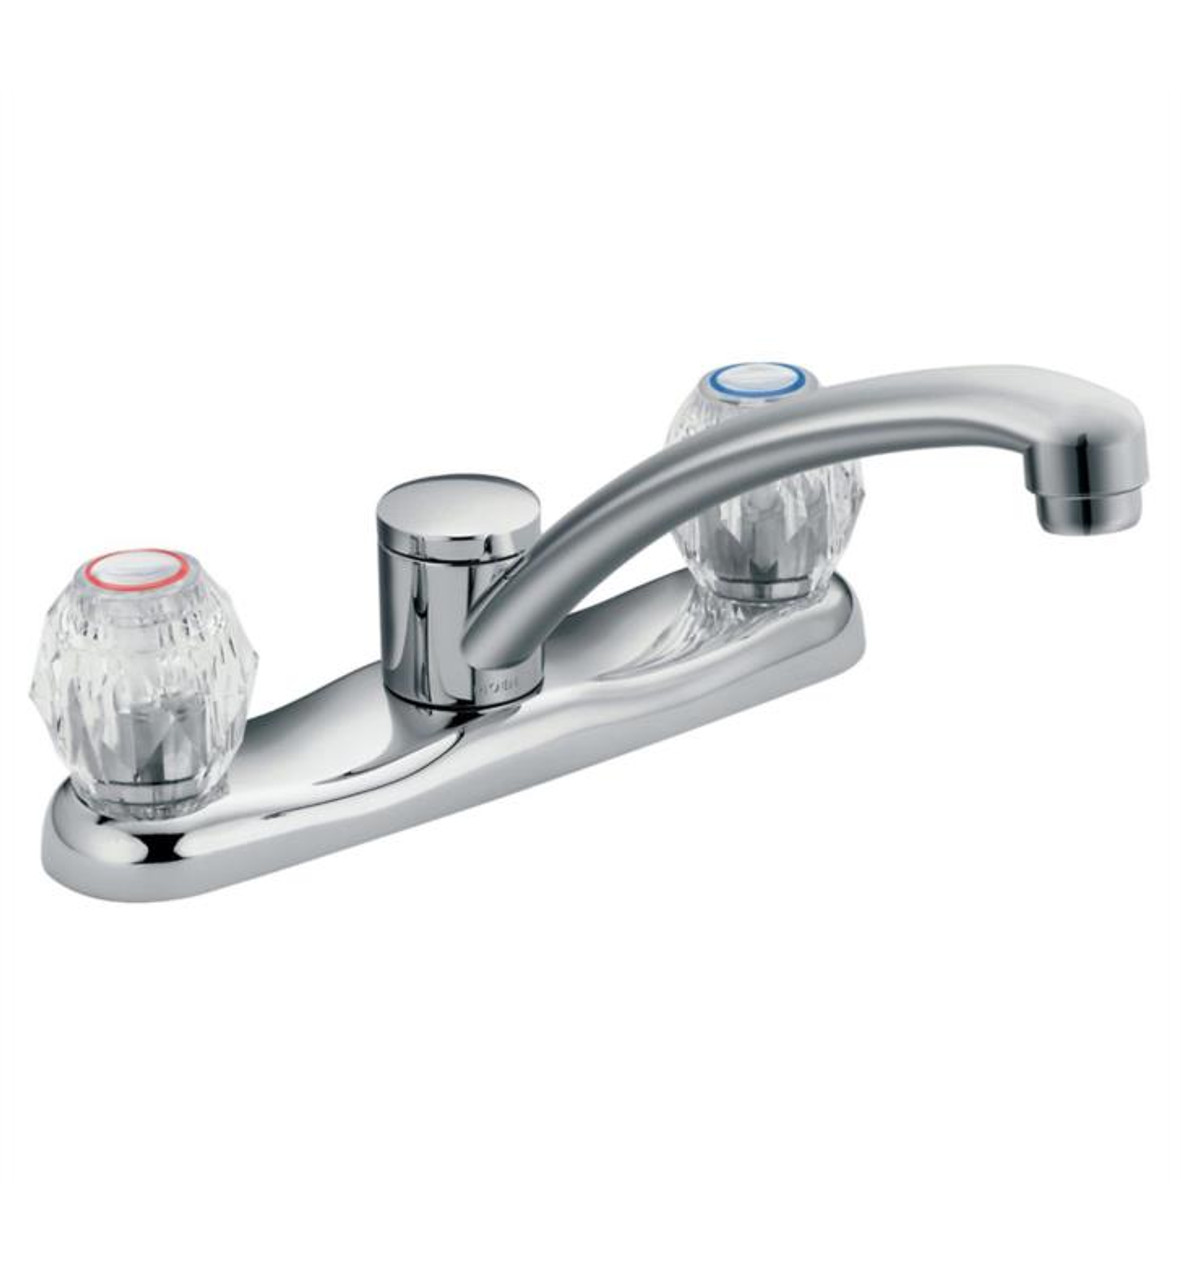 Moen Chateau 6 1/2" Double Handle Deck Mounted Kitchen Faucet in Chrome 7900